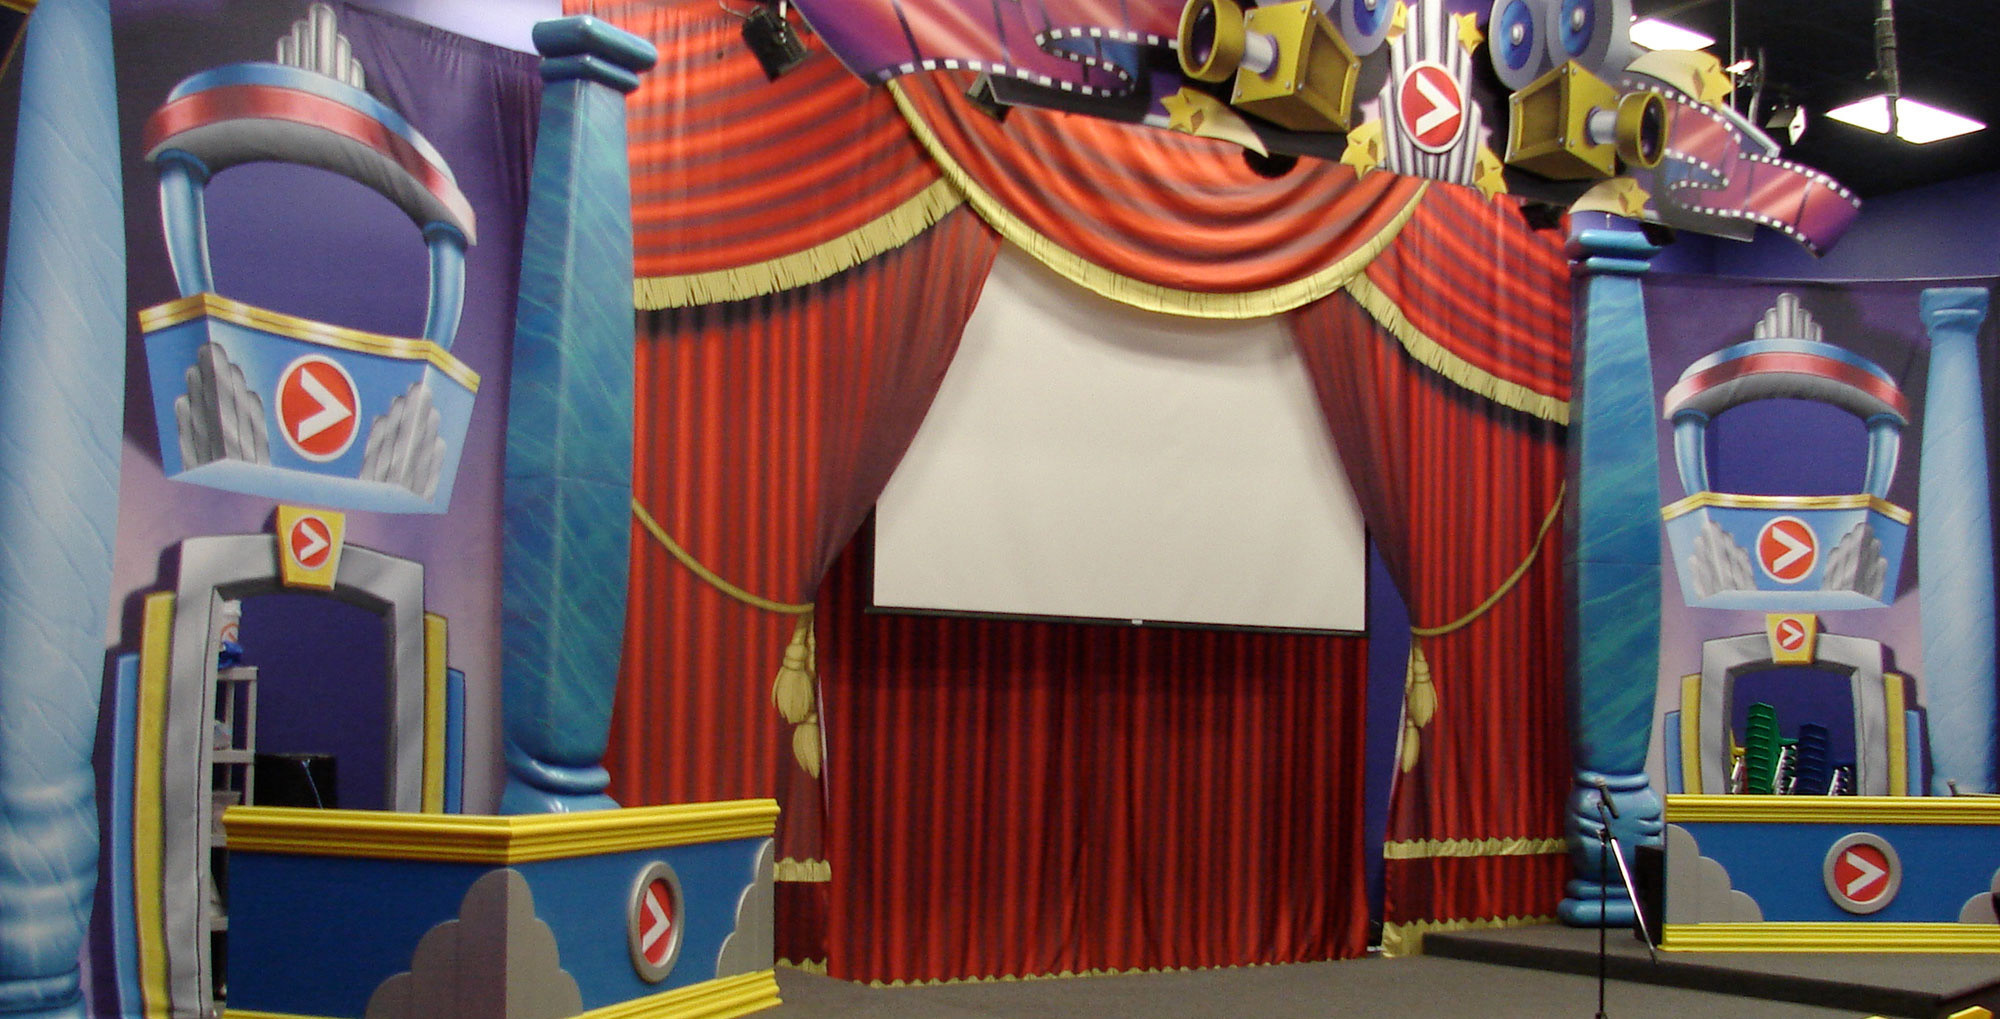 A large themed stage with Red curtains with gold fringe, blue sculpted pillars, side entries and a large 2D Back Lot Studio themed Sign.